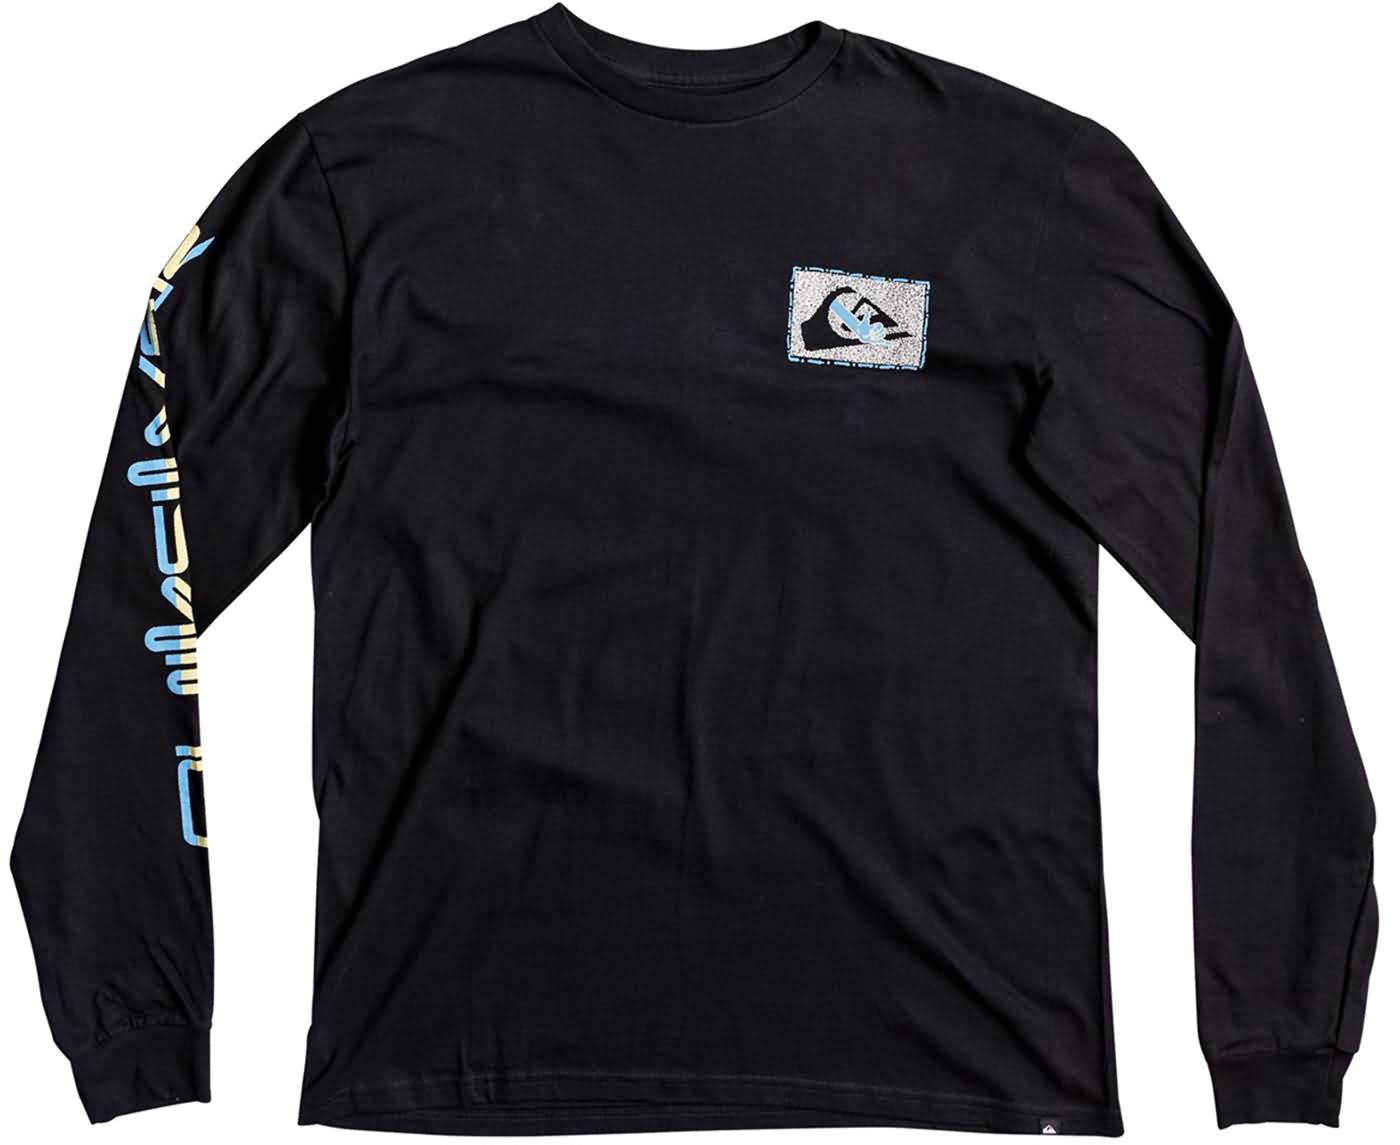 Quiksilver Surf Fall 2017 Mens Lifestyle Tee Shirts Preview